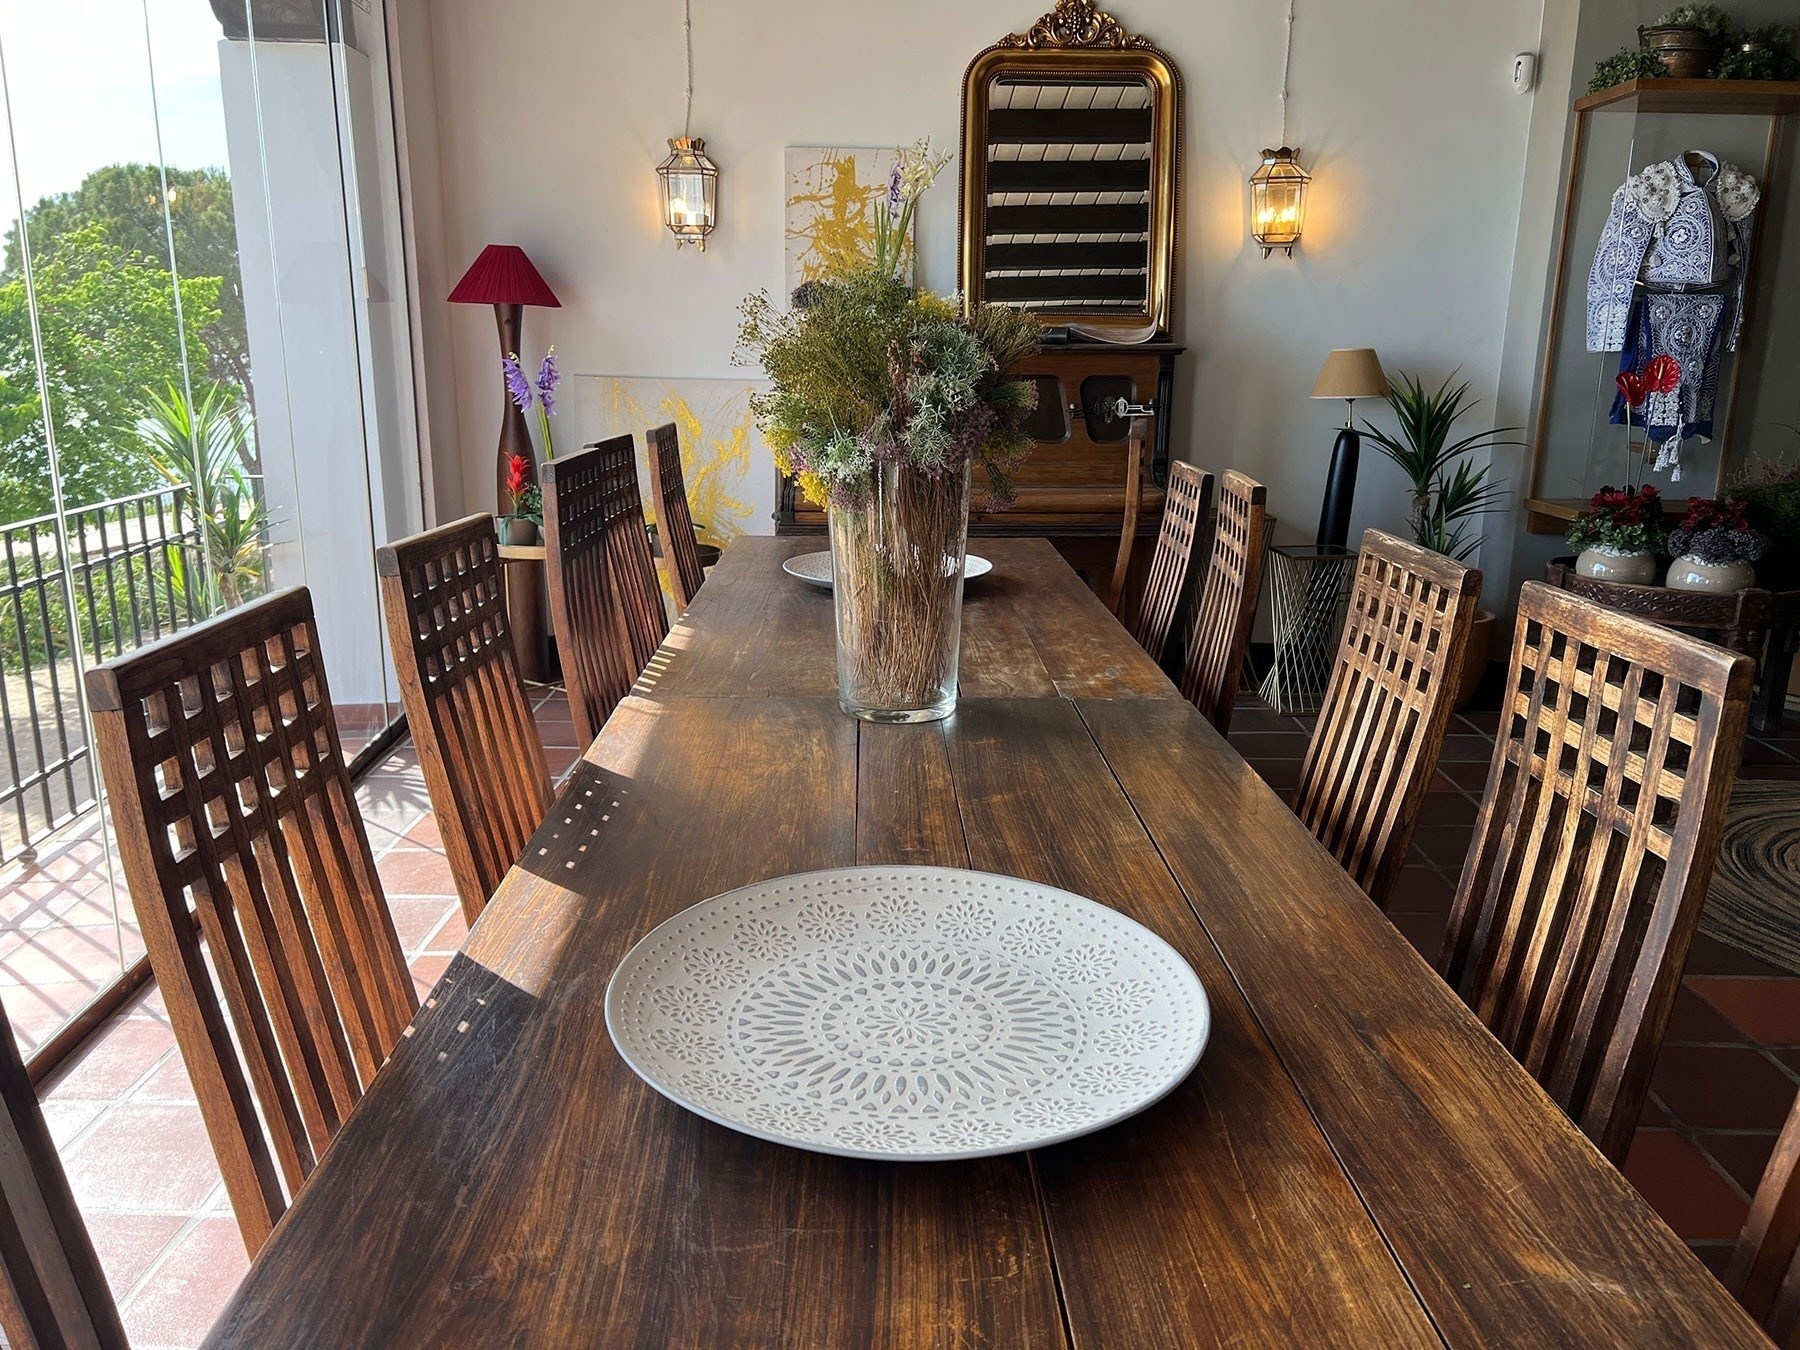 a long wooden table with a white plate on it